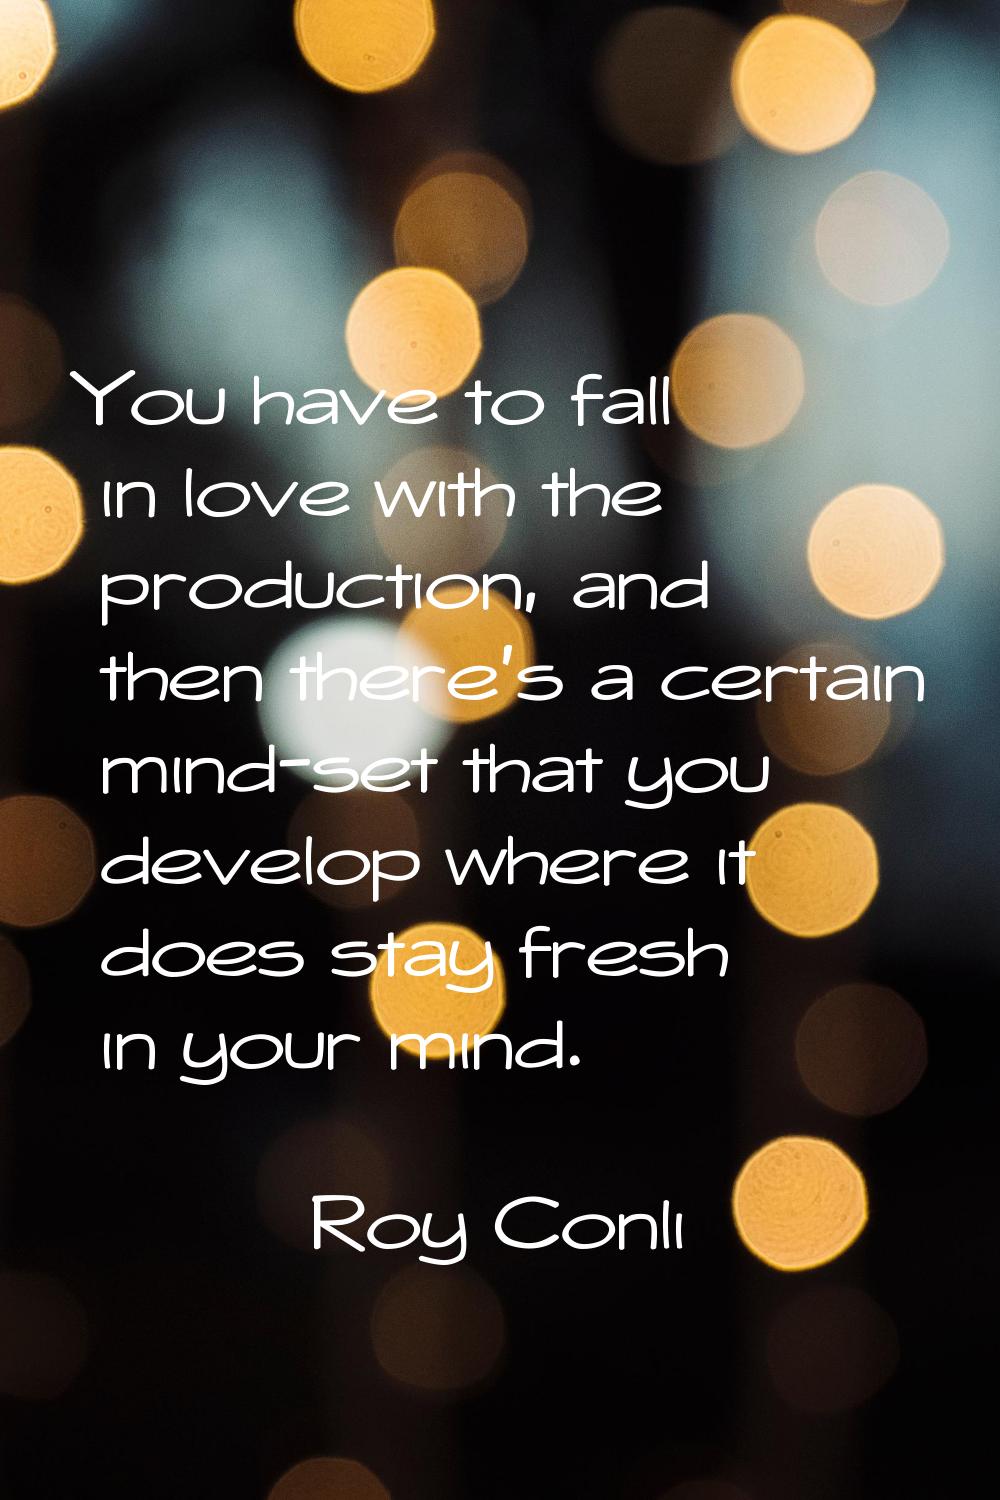 You have to fall in love with the production, and then there's a certain mind-set that you develop 